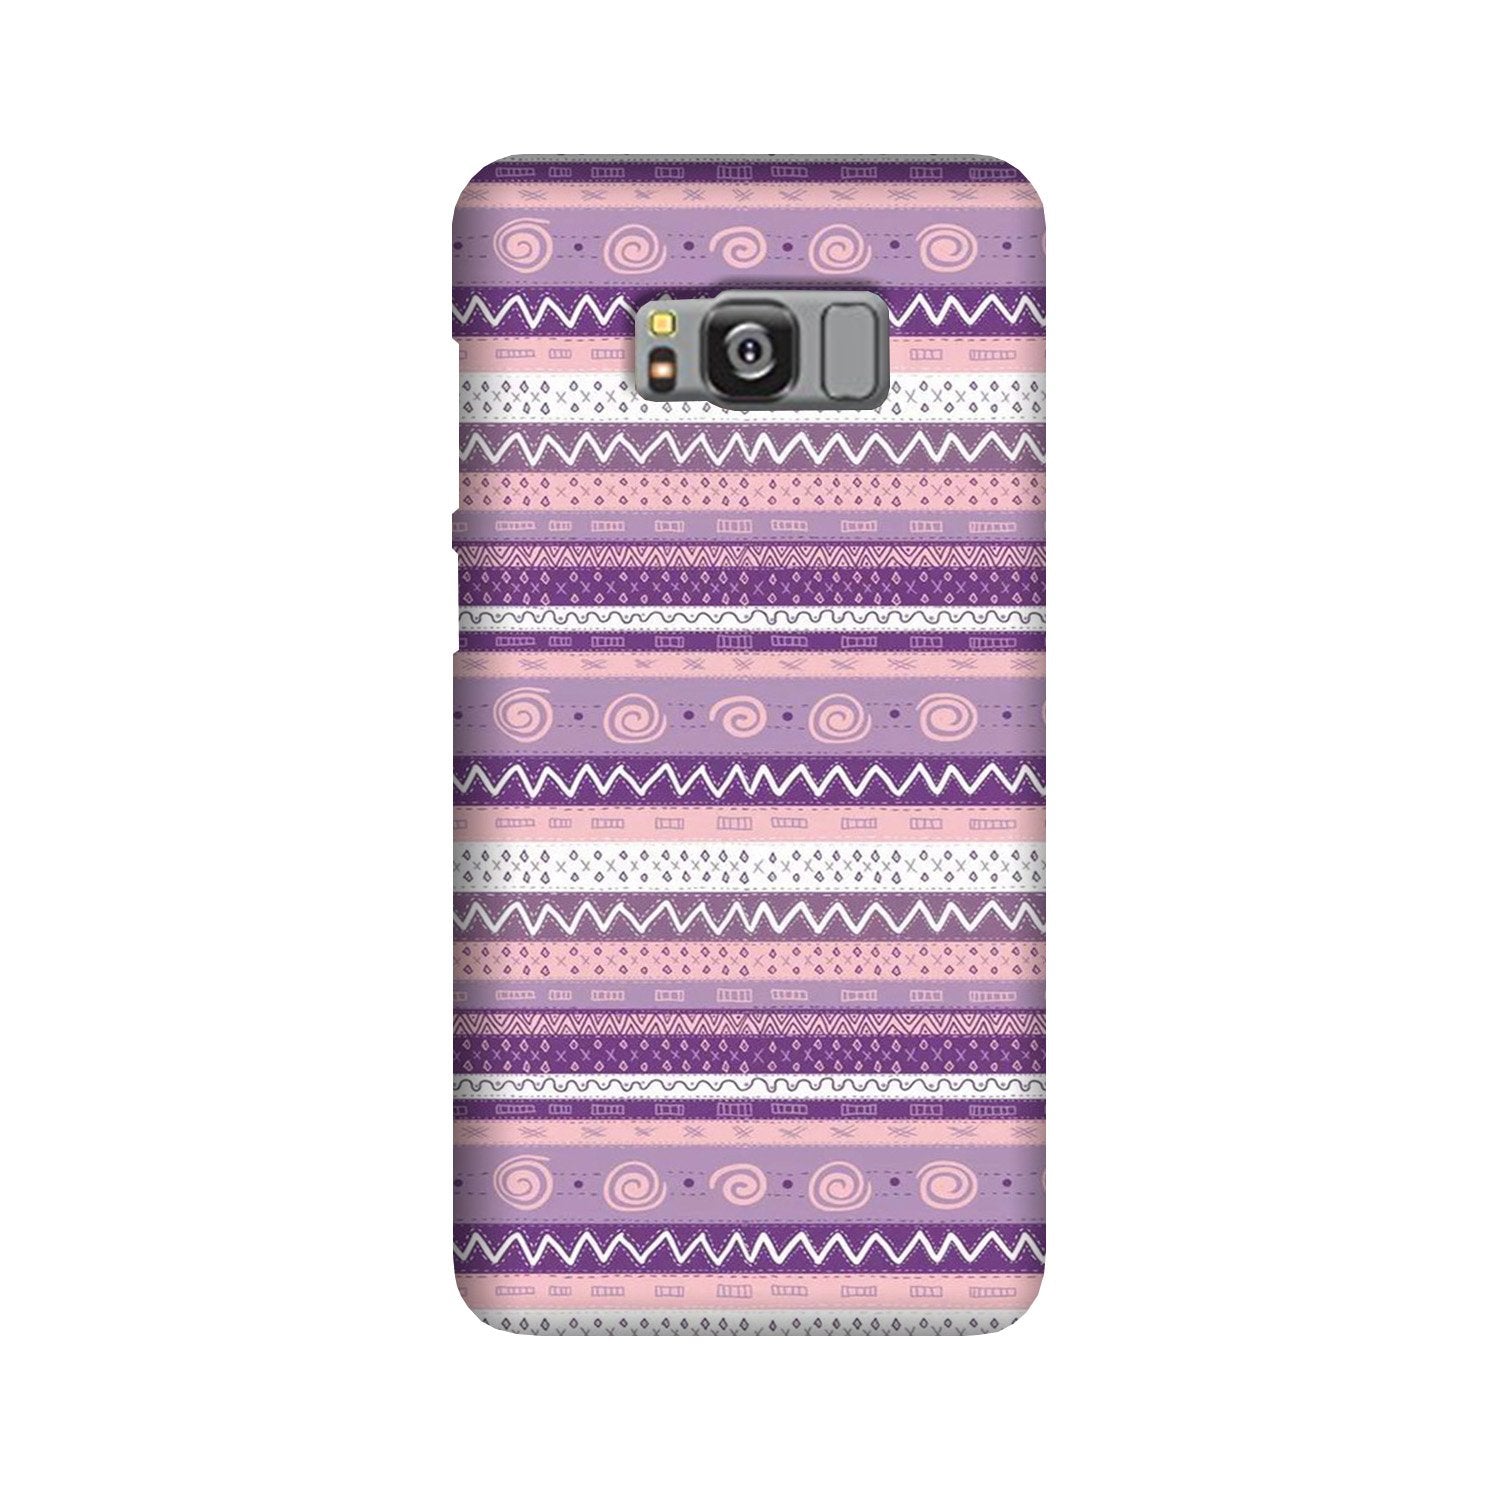 Zigzag line pattern3 Case for Galaxy S8 Plus